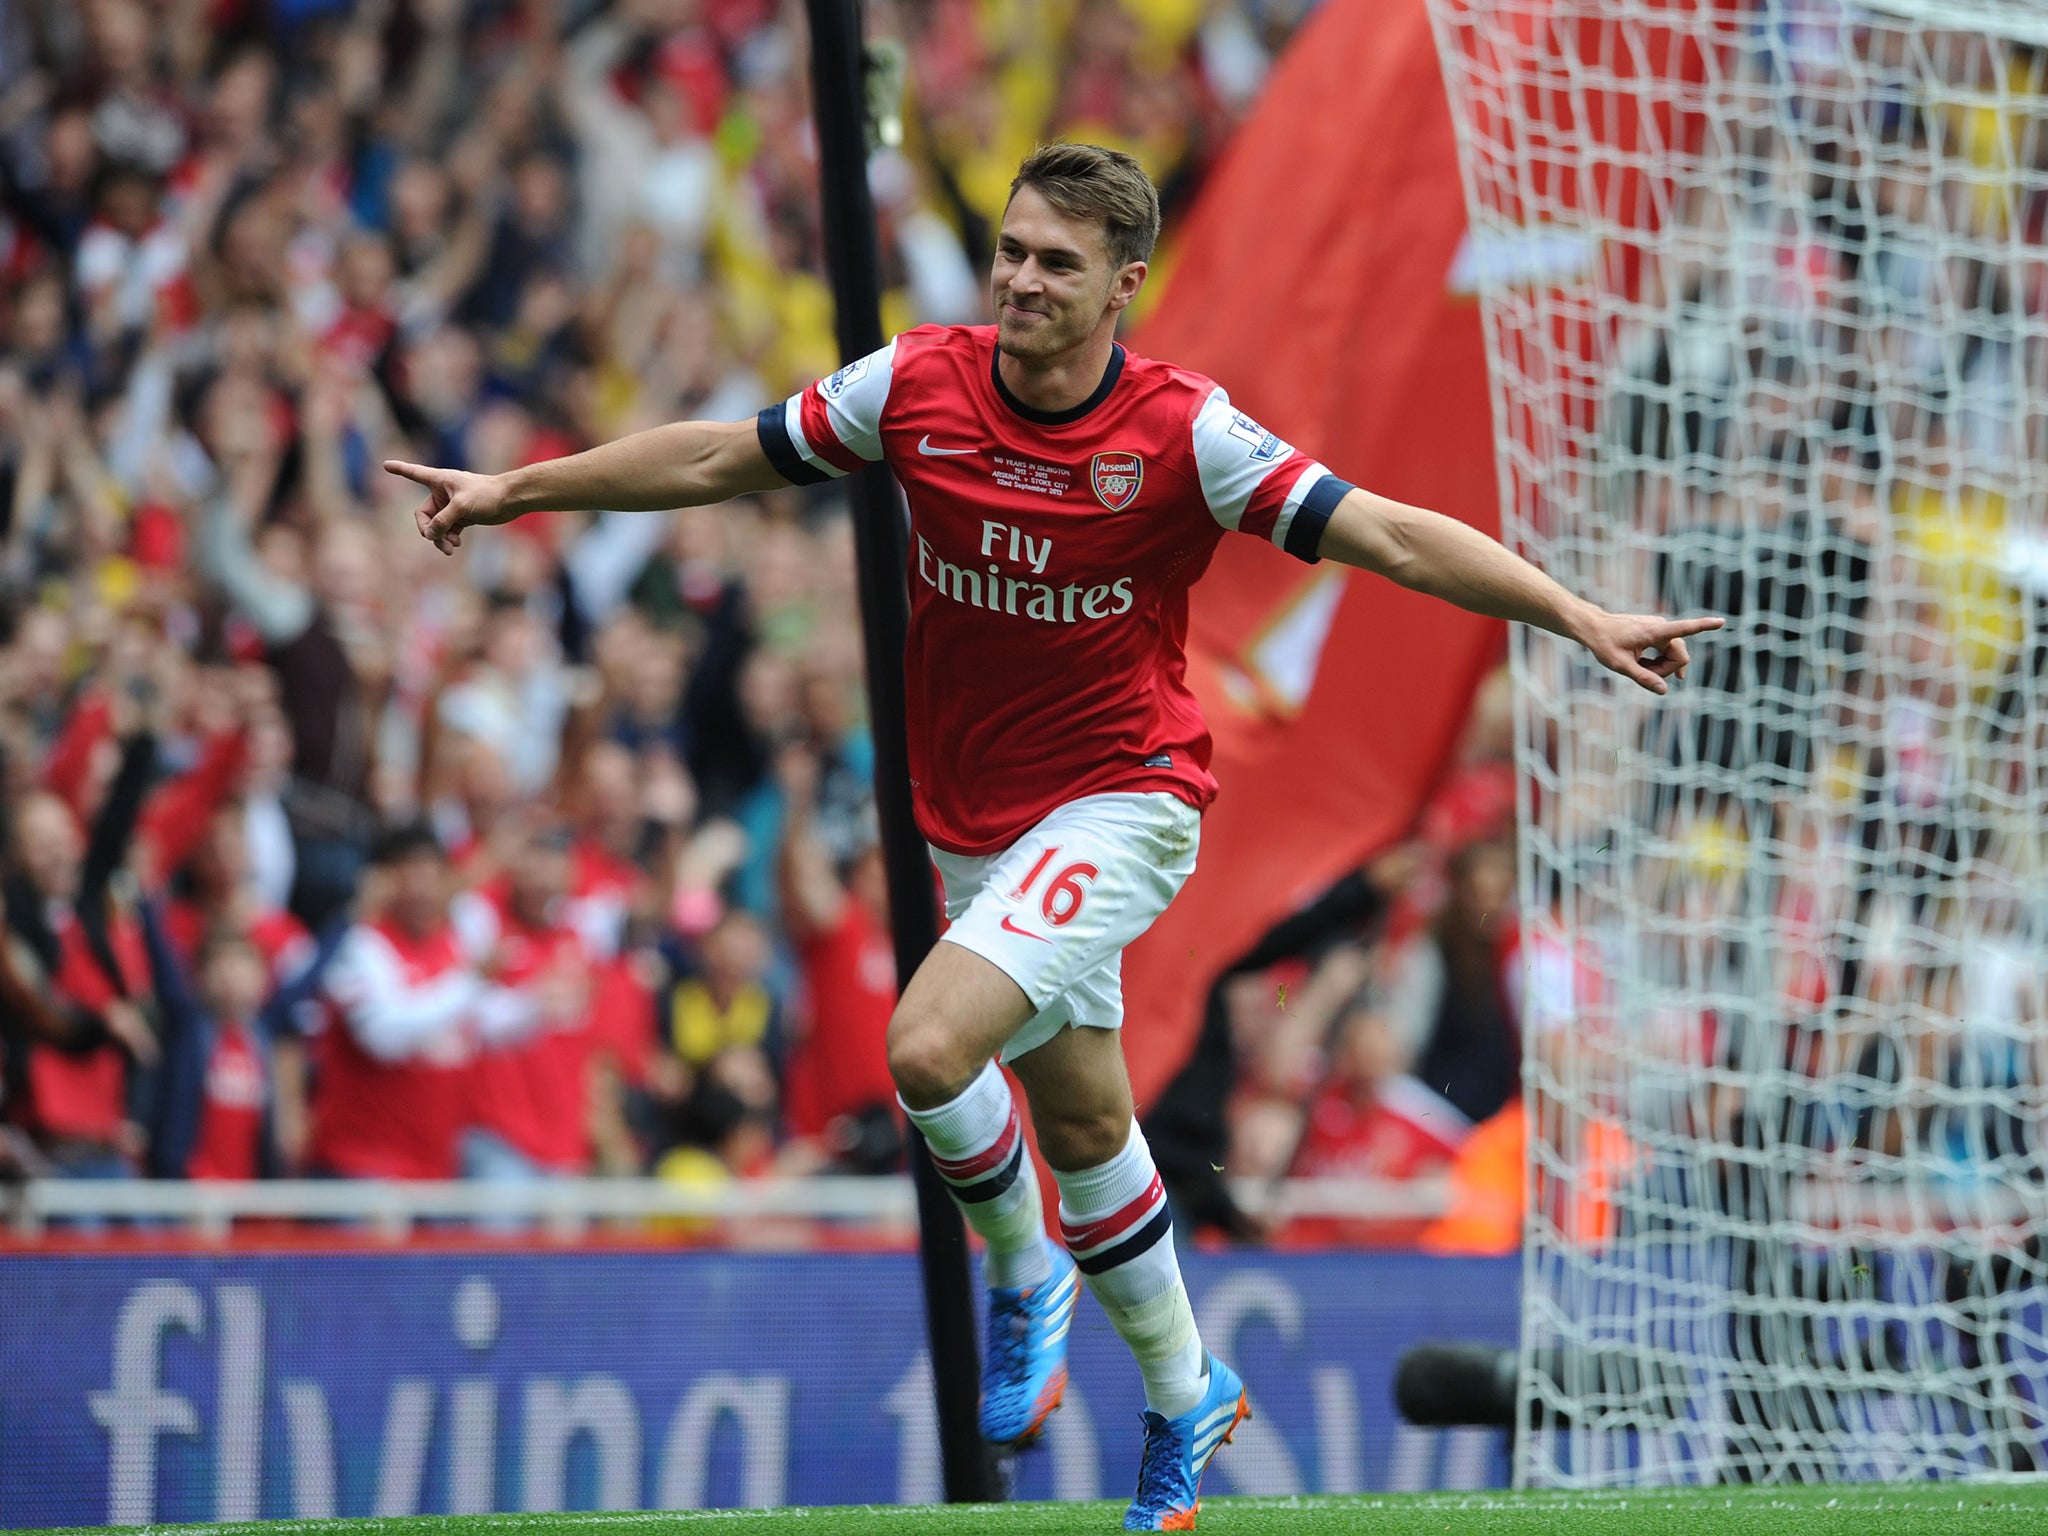 Aaron Ramsey scores yet again to help Arsenal to victory against Stoke